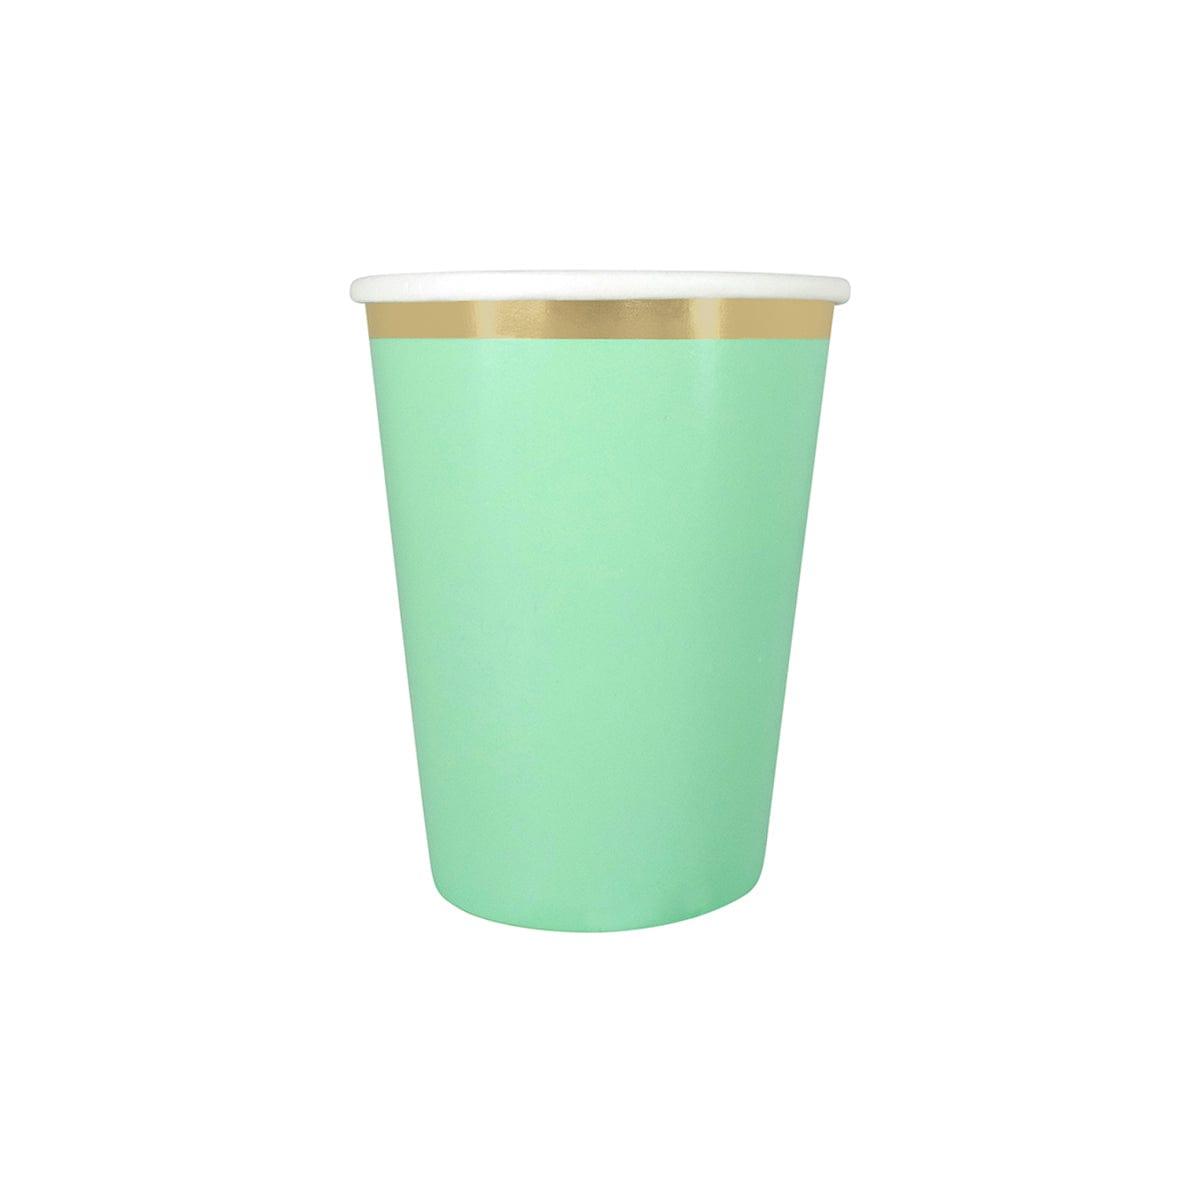 YIWU SANDY PAPER PRODUCTS CO., LTD Everyday Entertaining Mint Green Cups, 9 Oz, 8 Count